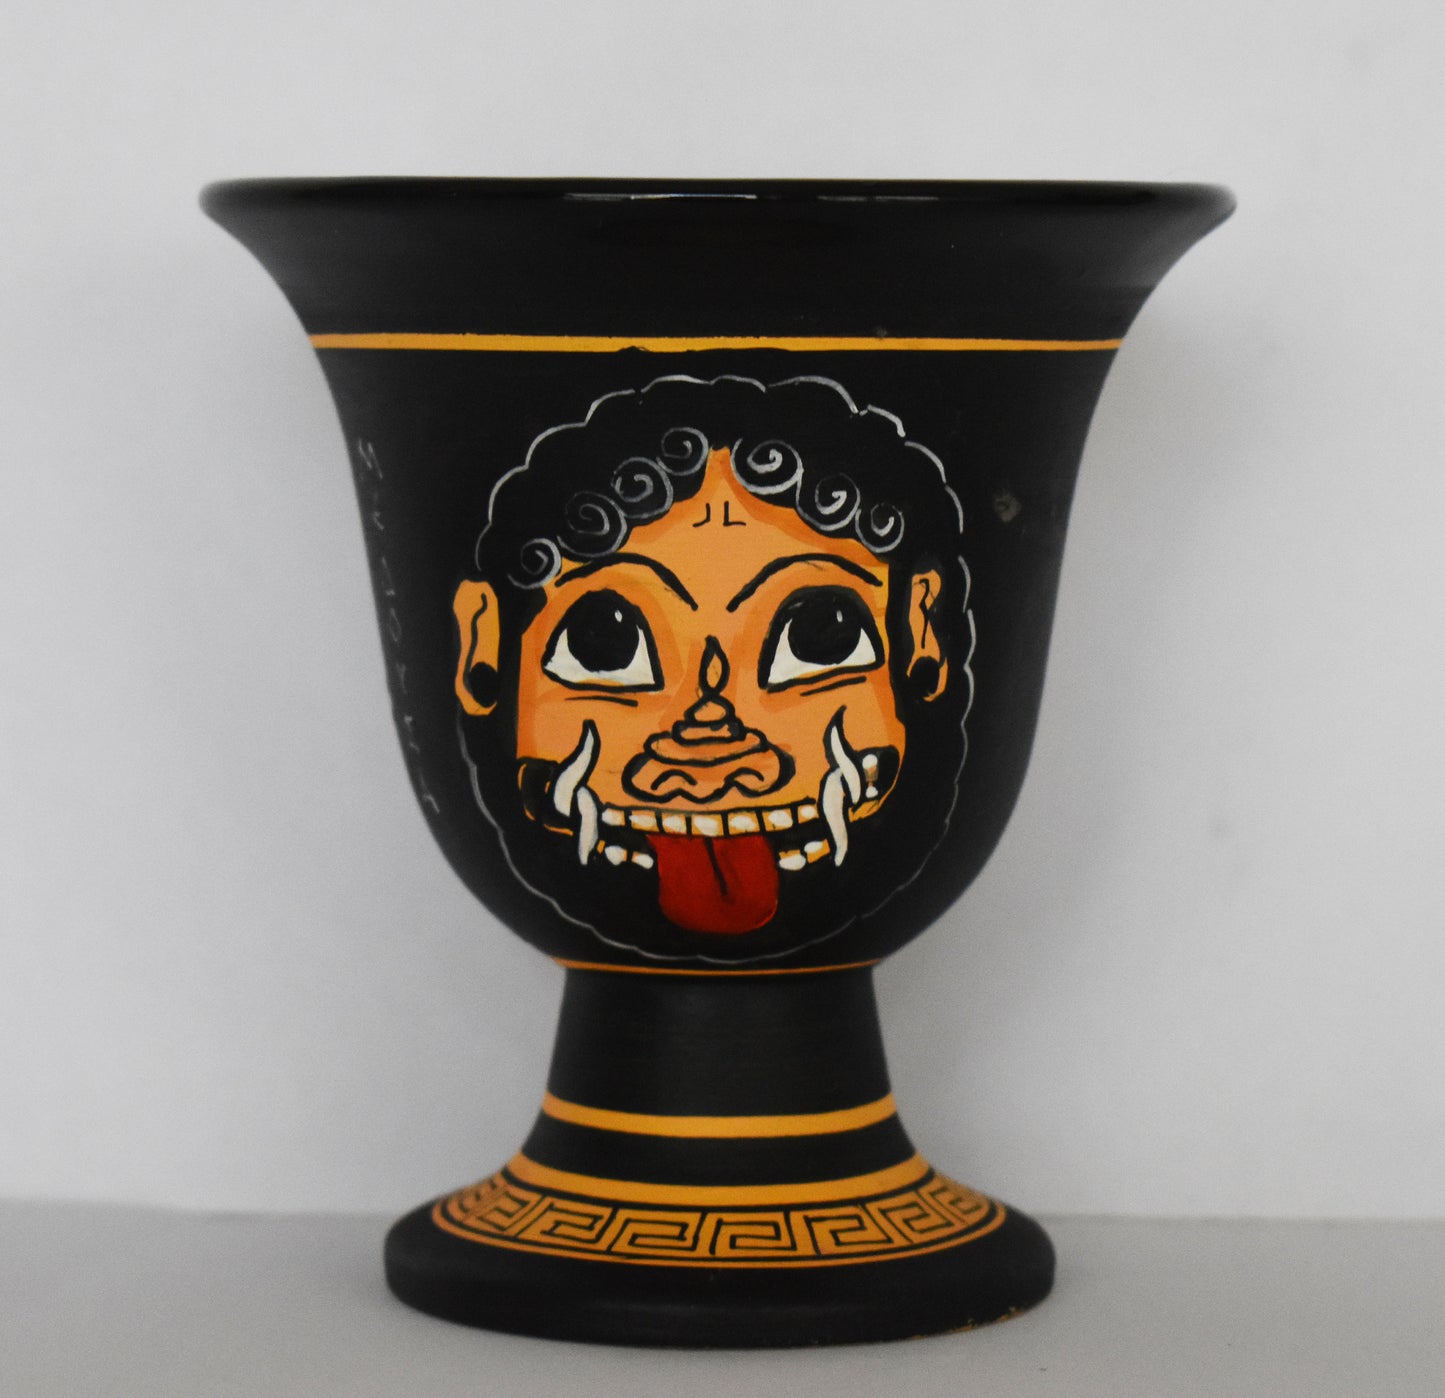 Pythagoras Cup - Fair Cup, Cup of Justice - Medusa Head - Snake-Haired Gorgon - Snake Lady - Monster Figure  - Ceramic  - Handmade in Greece